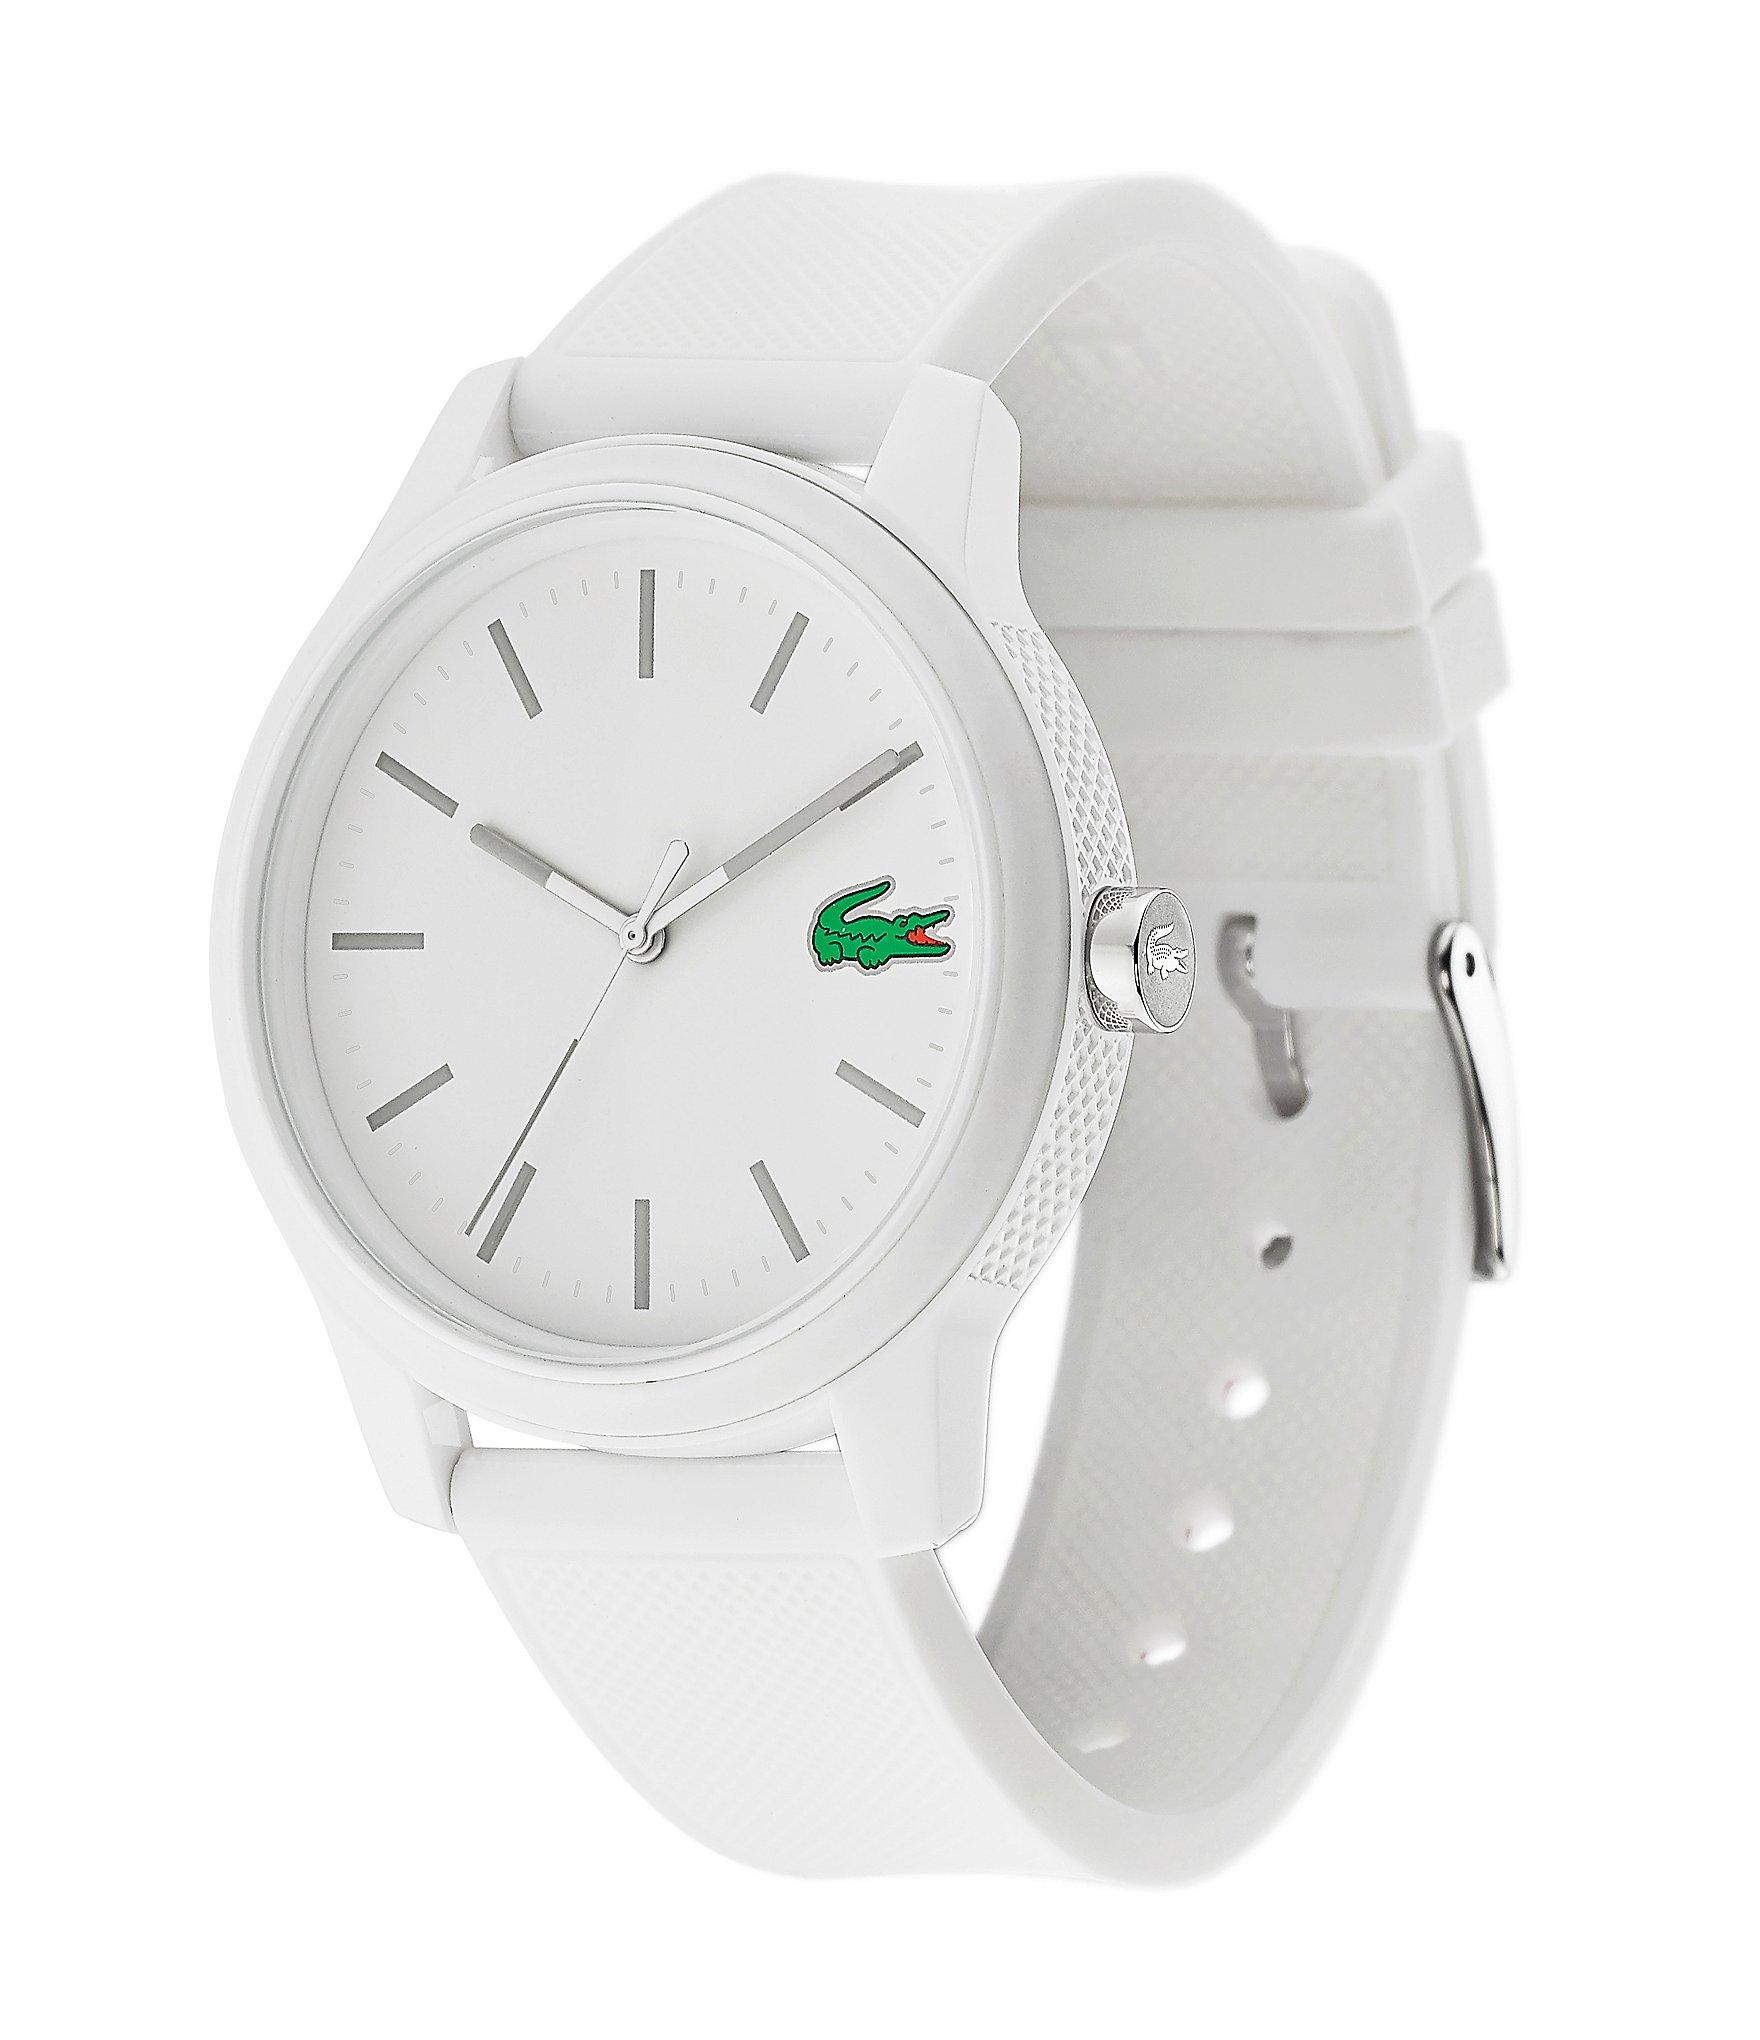 Lacoste 12.12 Chronograph Watch in White for Men - Save 41% - Lyst